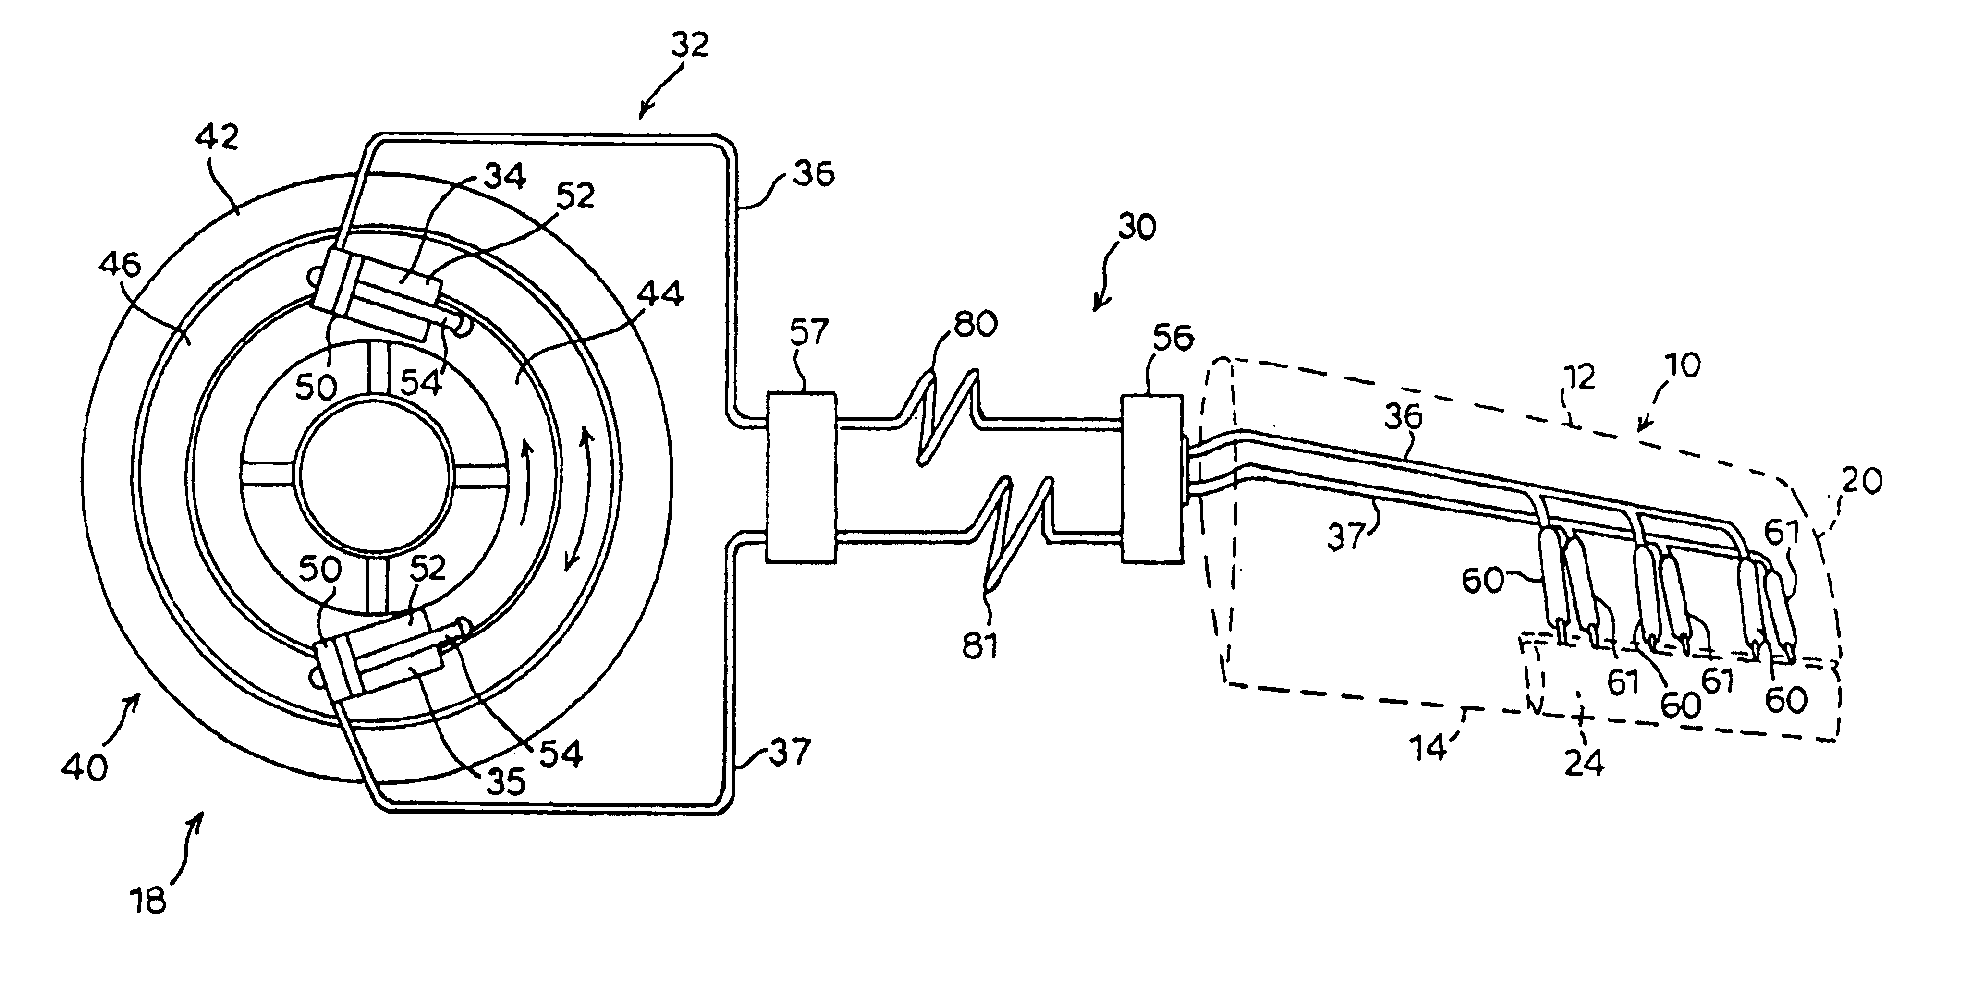 Fluid conduit for use with hydraulic actuator